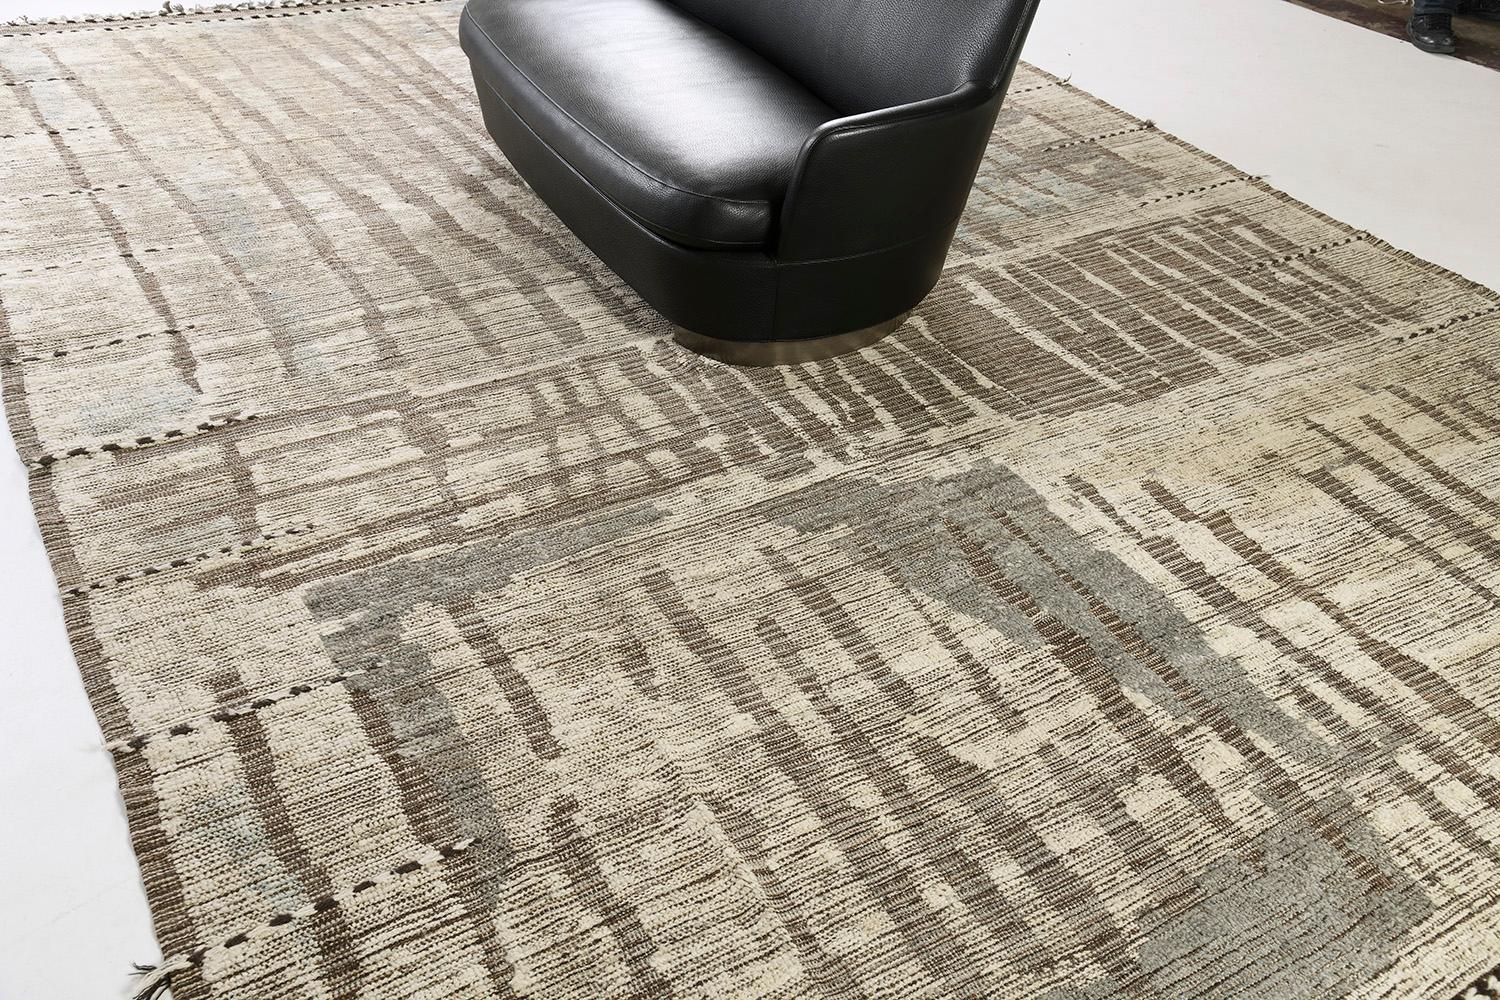 Tamarix is made of elegant wool and timeless design elements. The weaving of earthy tones and contemporary elements is what makes the Atlas Collection so unique and sought after. Mehraban's Atlas collection is noted for its saturated color,